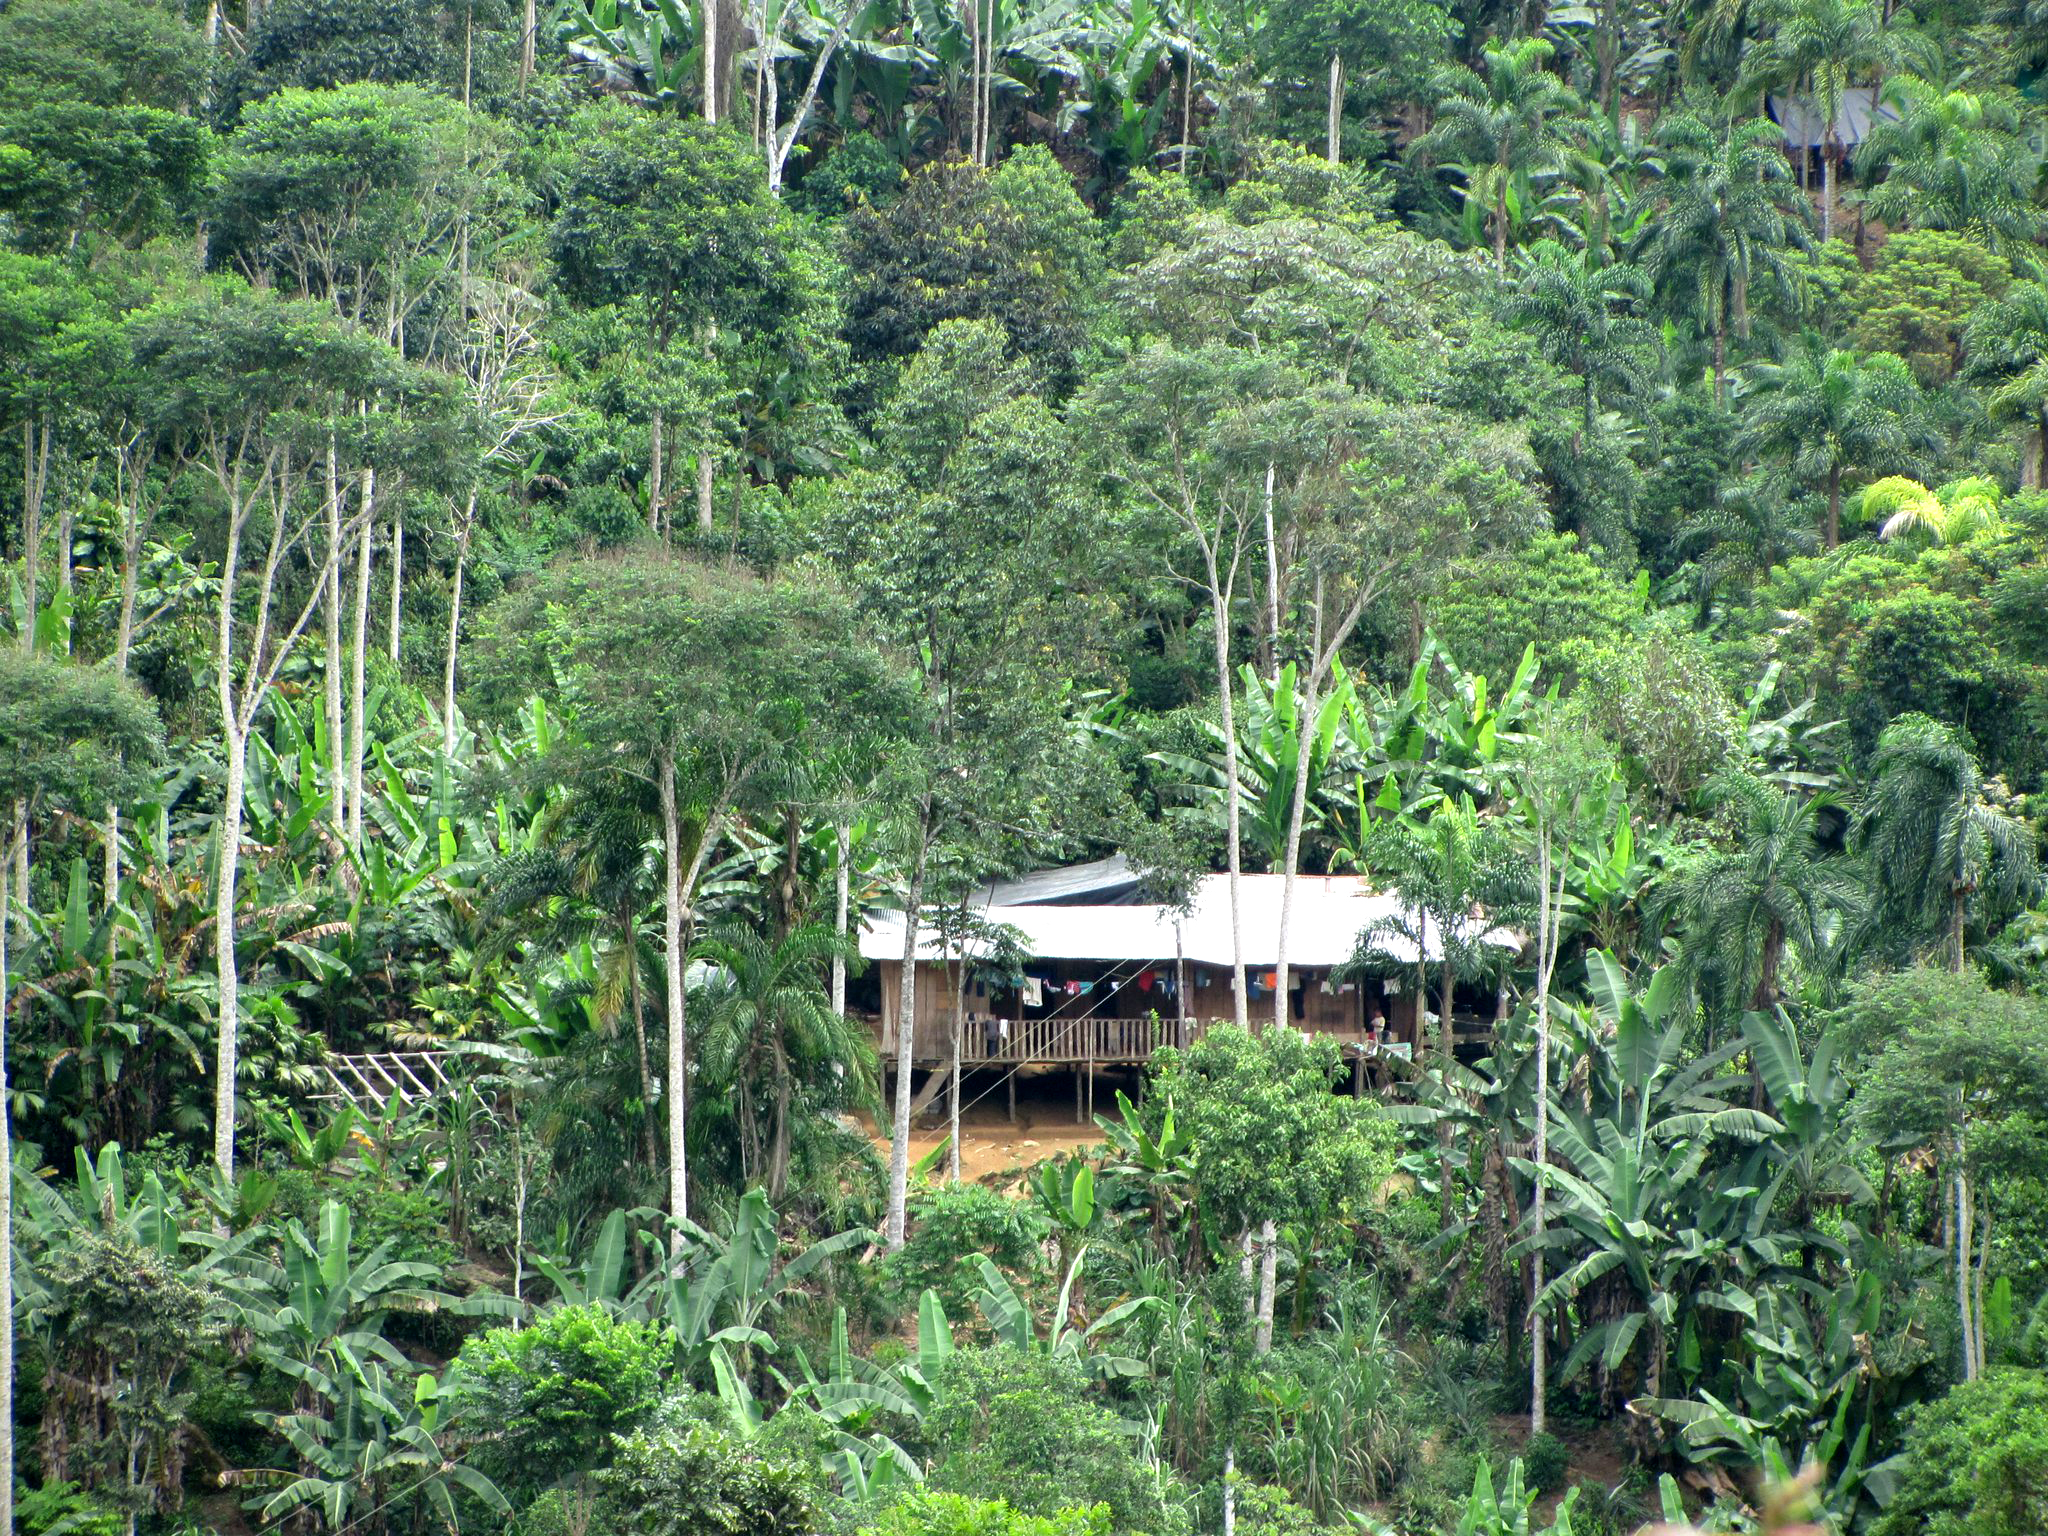 A building on stilts in the middle of a forest with banana trees